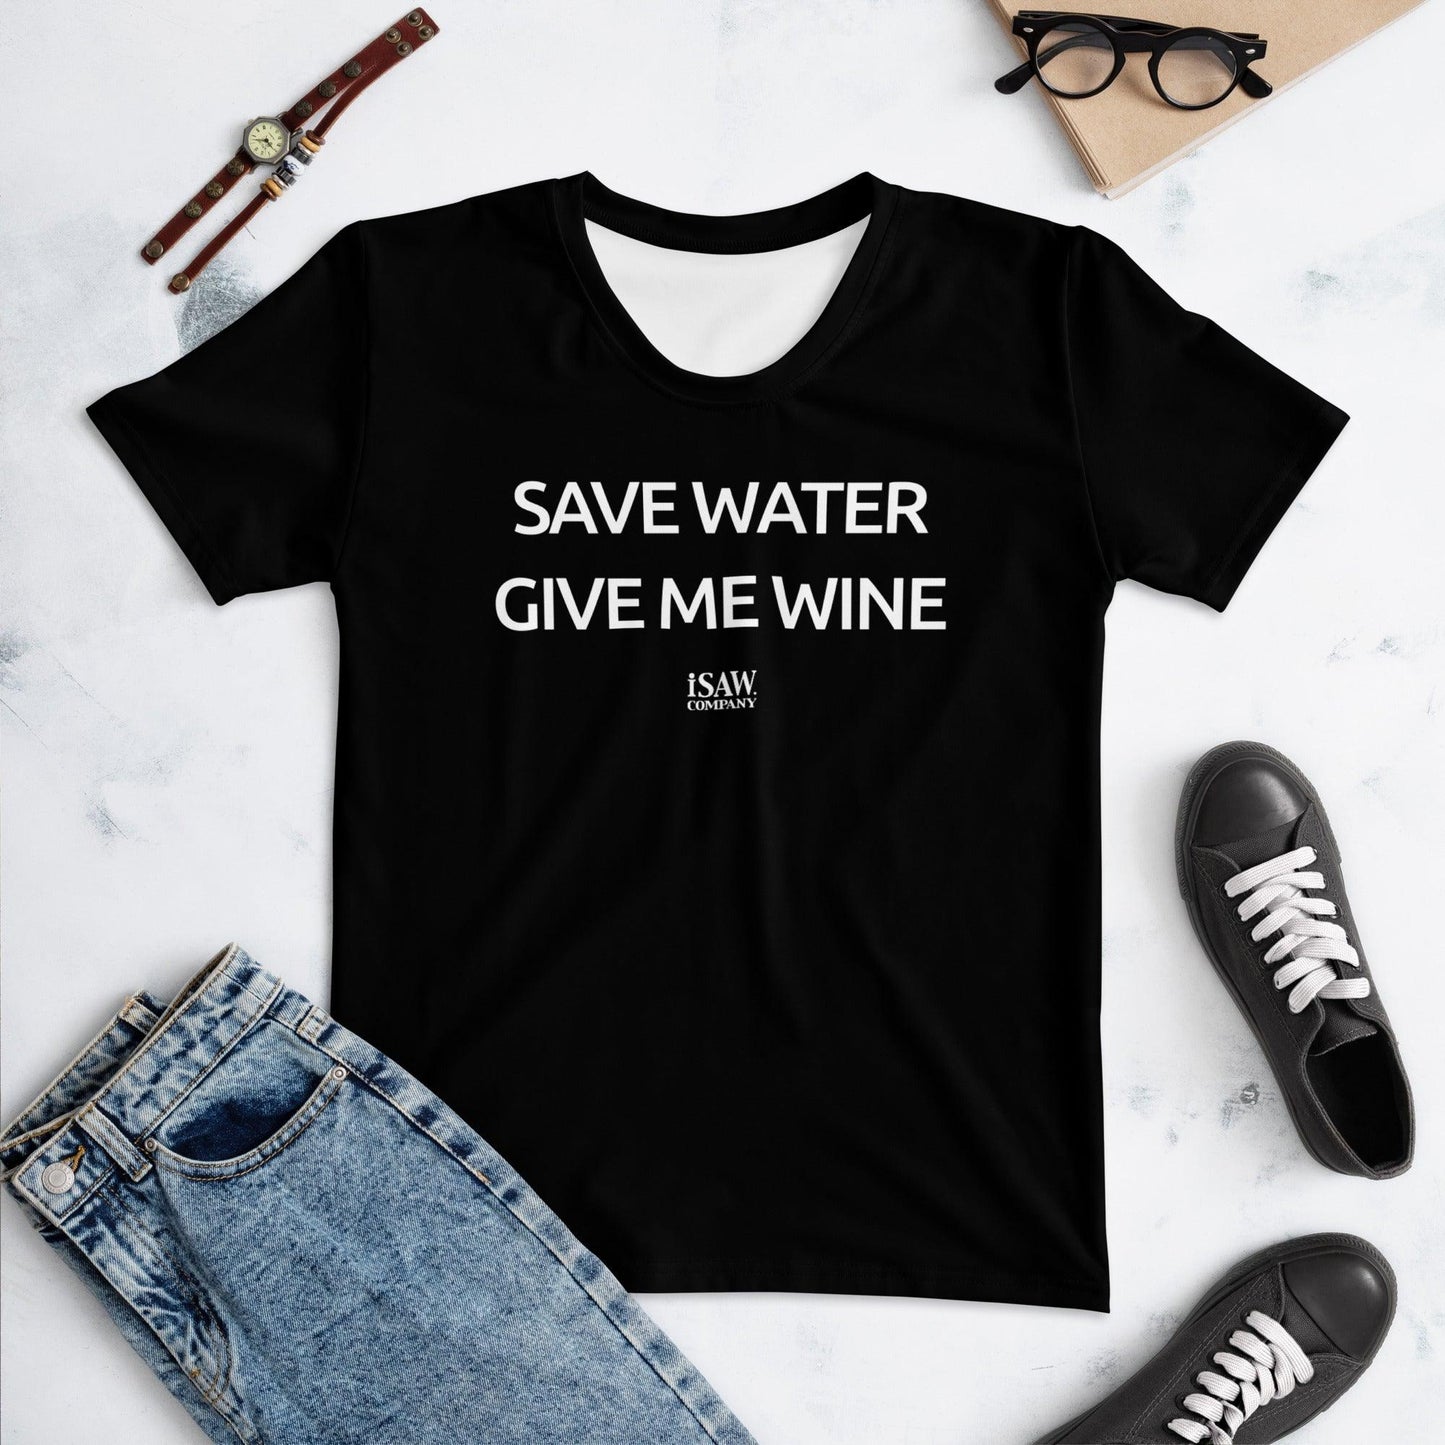 Save Water Give Me Wine - Womens Black T-Shirt - iSAW Company